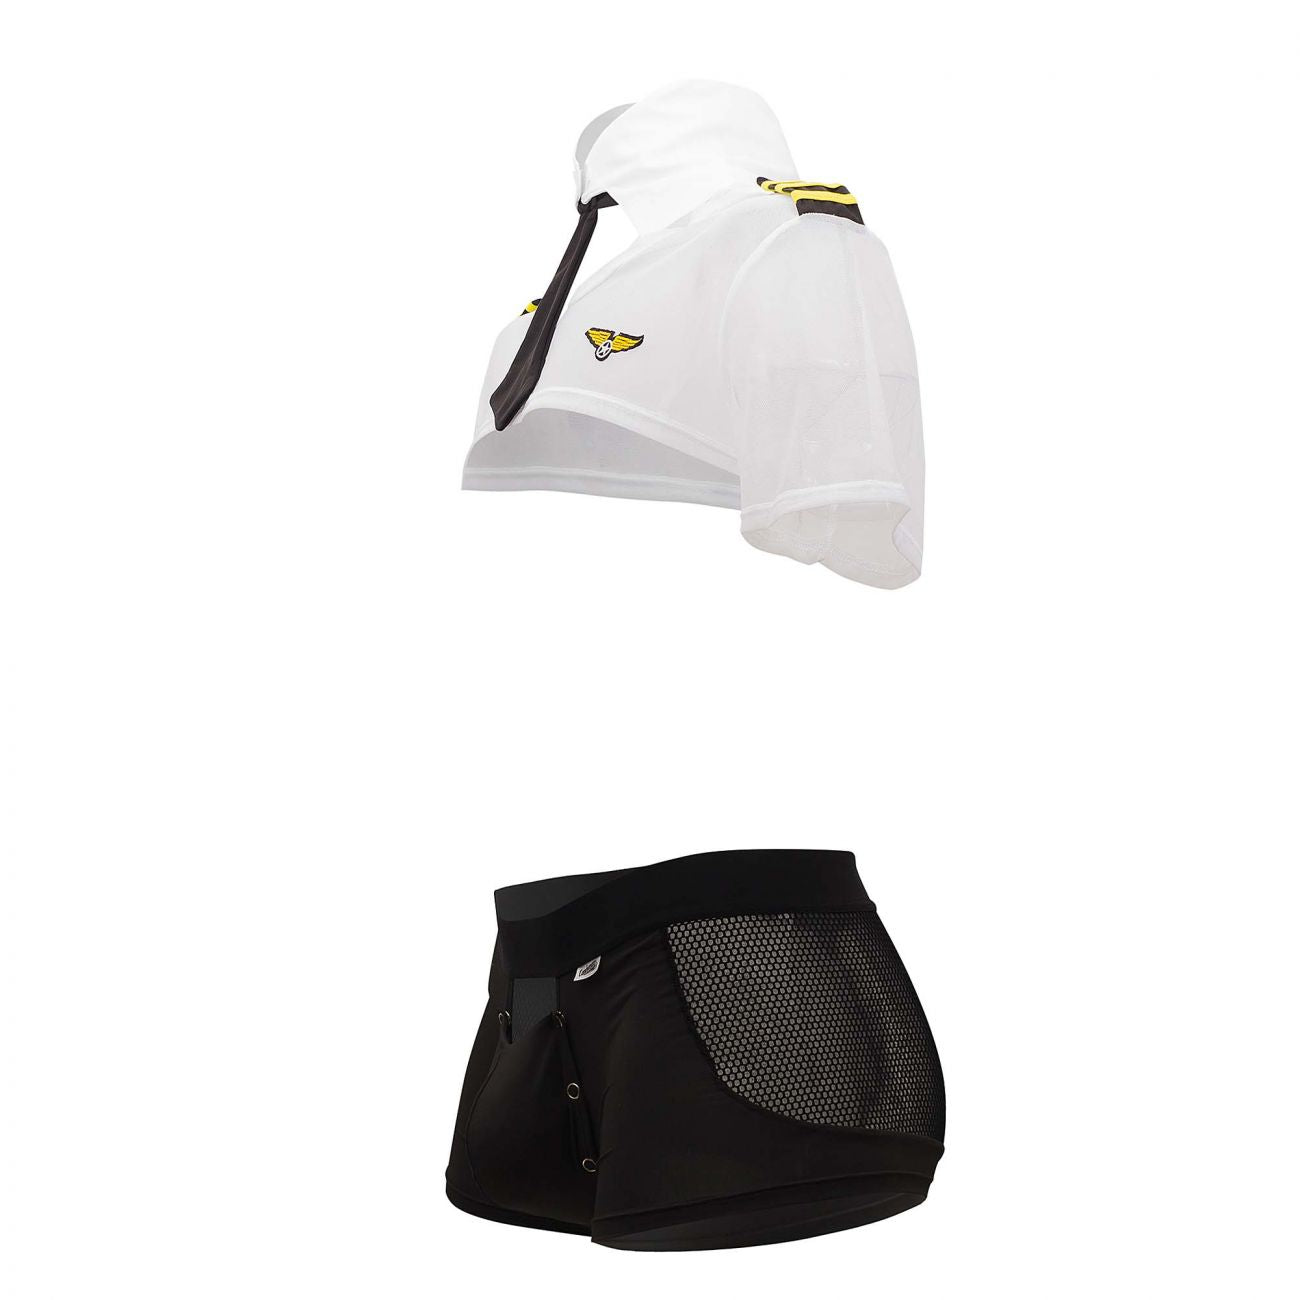 CandyMan 99561 Pilot Costume Outfit Black & White